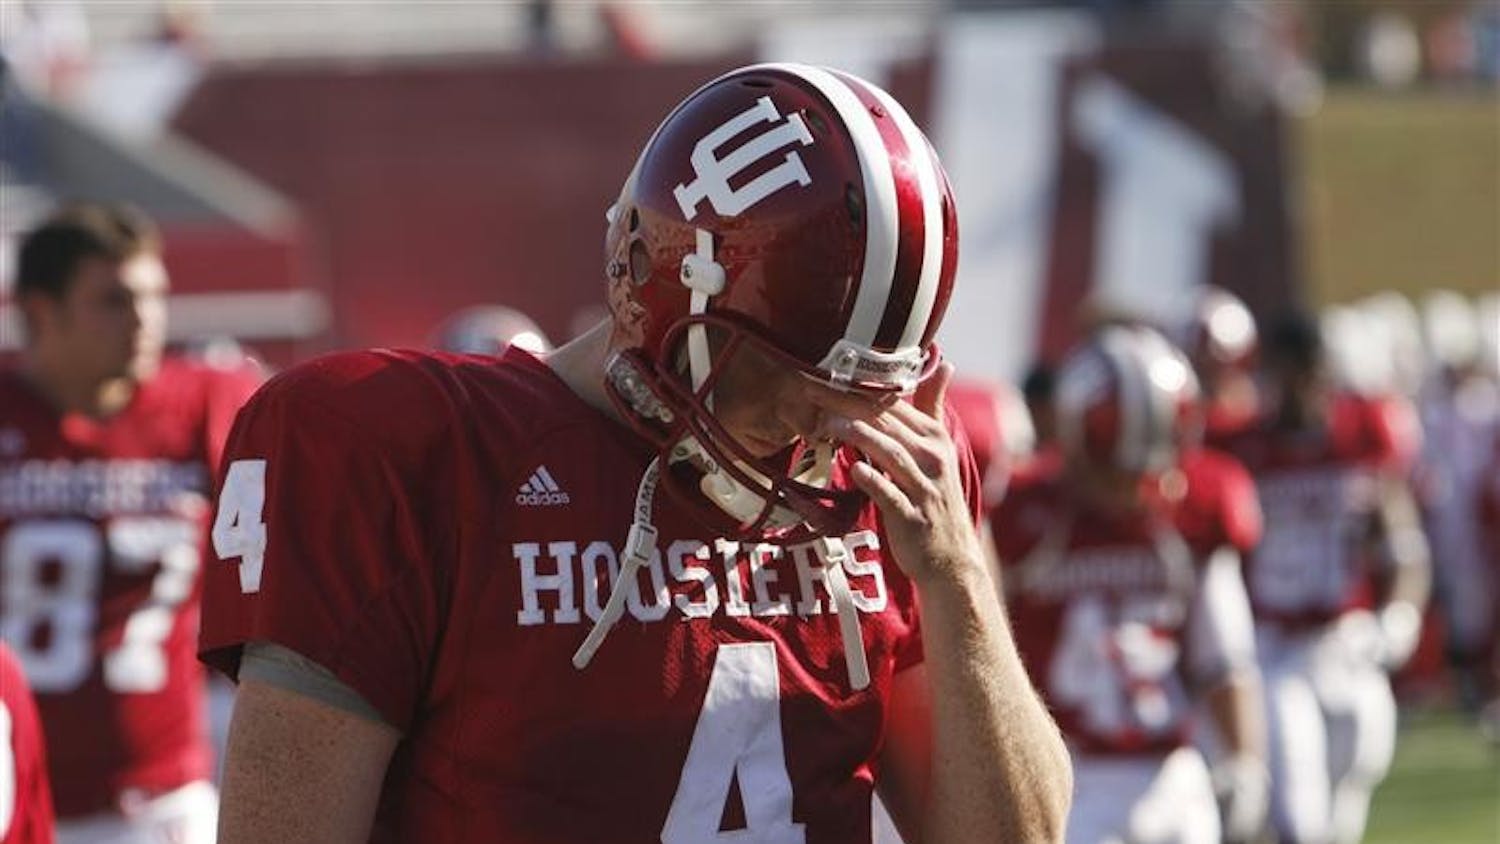 IU quarterback Ben Chappell covers his face as he walks off the field after Saturday's loss to Central Michigan at Memorial Stadium.